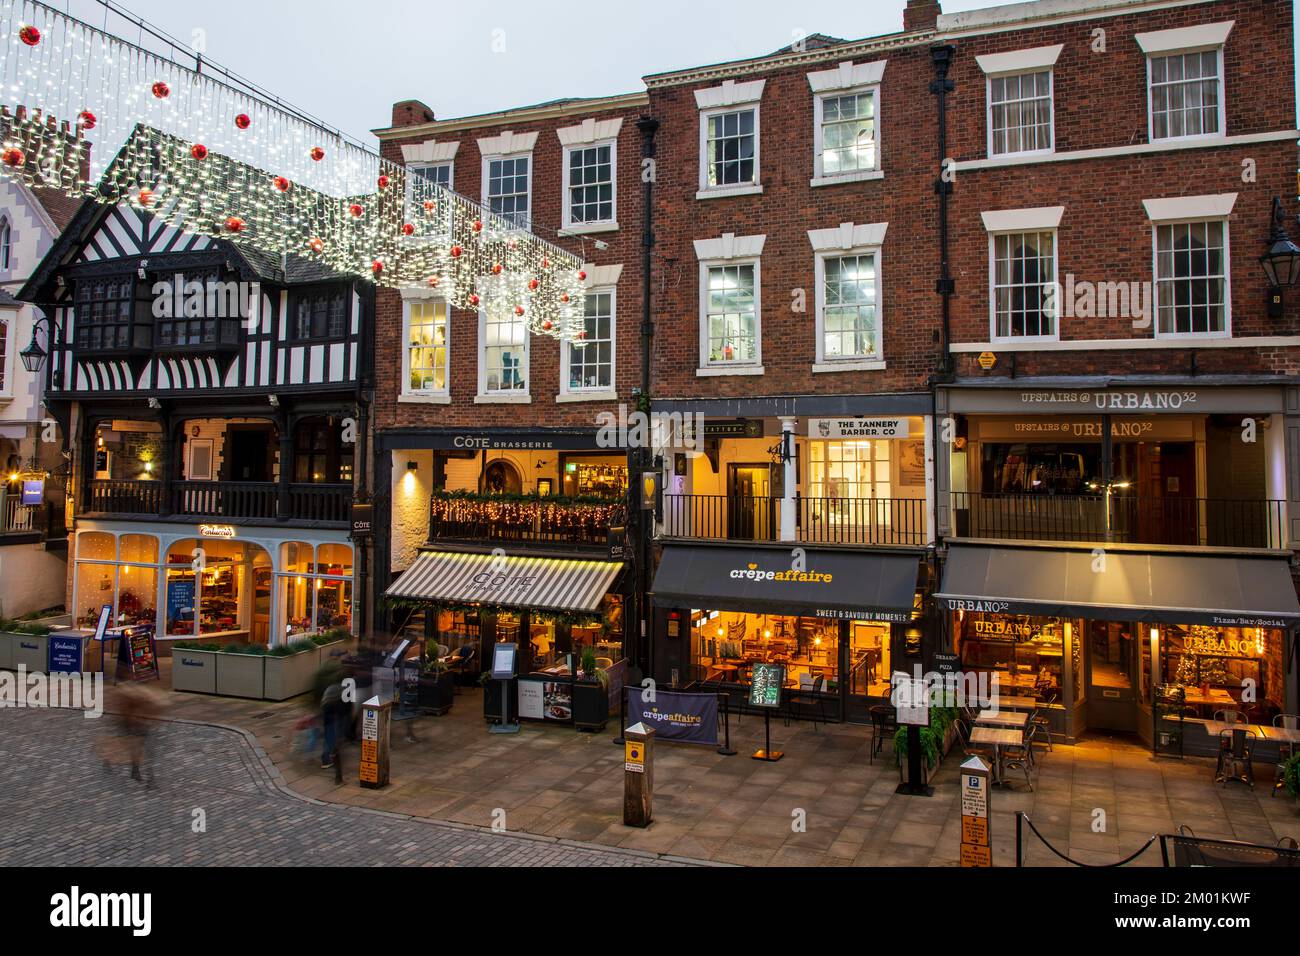 Chester, United Kingdom - November 30th, 2022: Christmas lights decorate old town of Chester Stock Photo